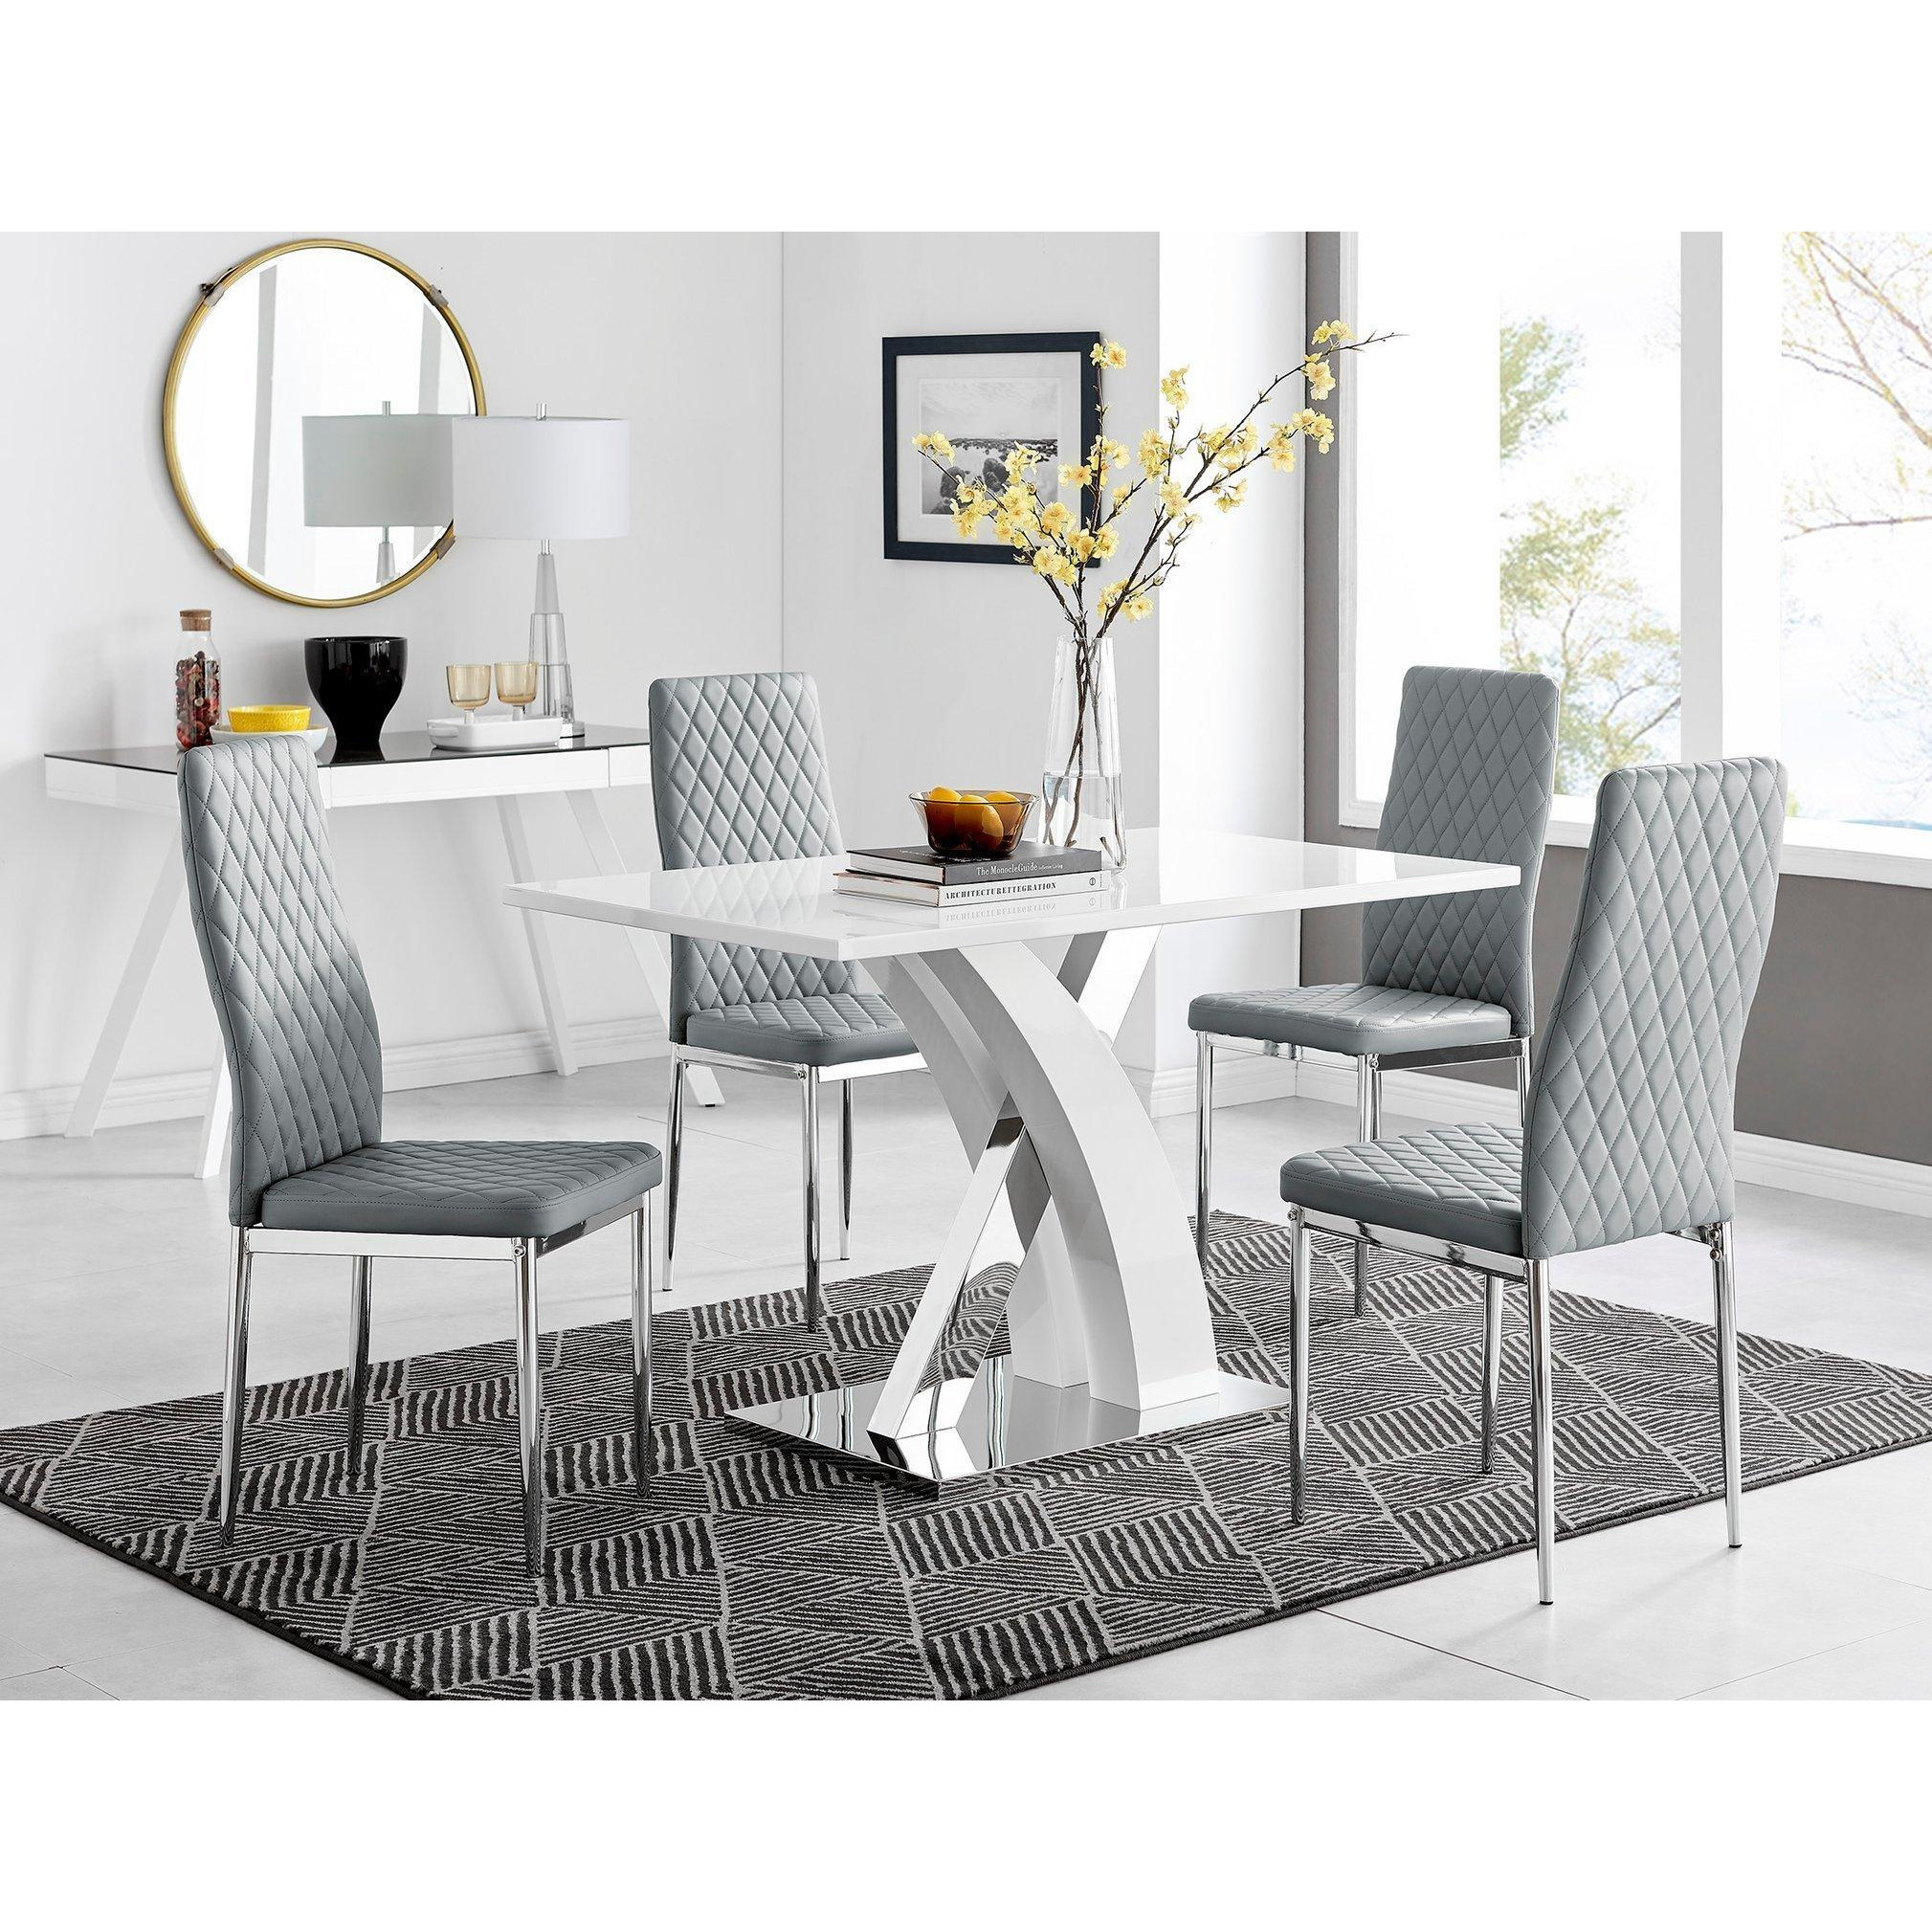 Atlanta White High Gloss and Chrome 4 Seater Dining Table with X Shaped Legs and 4 Faux Leather Milan Chairs - image 1